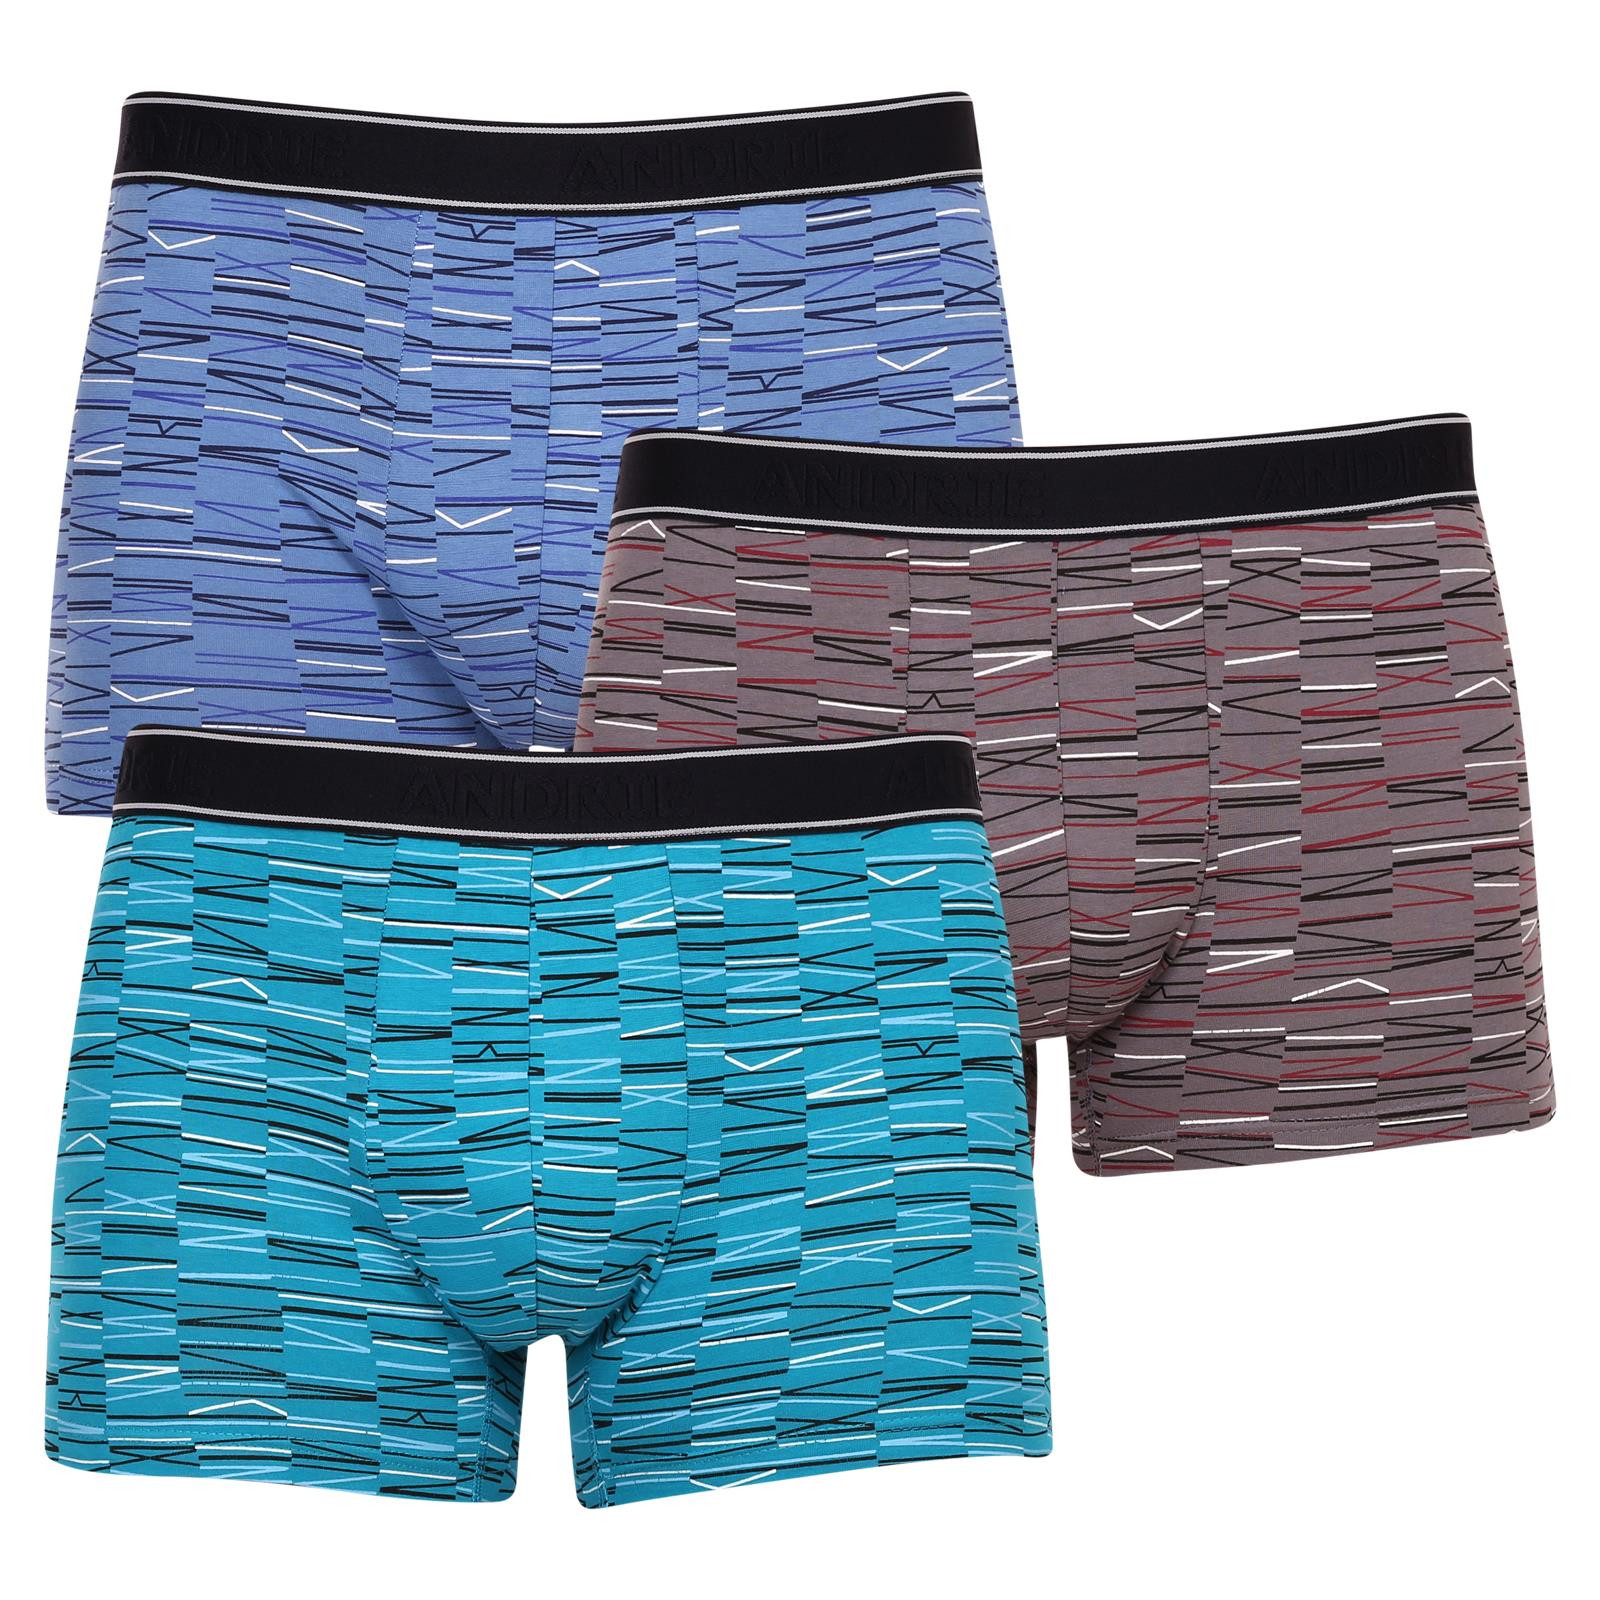 3PACK Men's Boxer Shorts Andrie Multicolor (PS 5648)